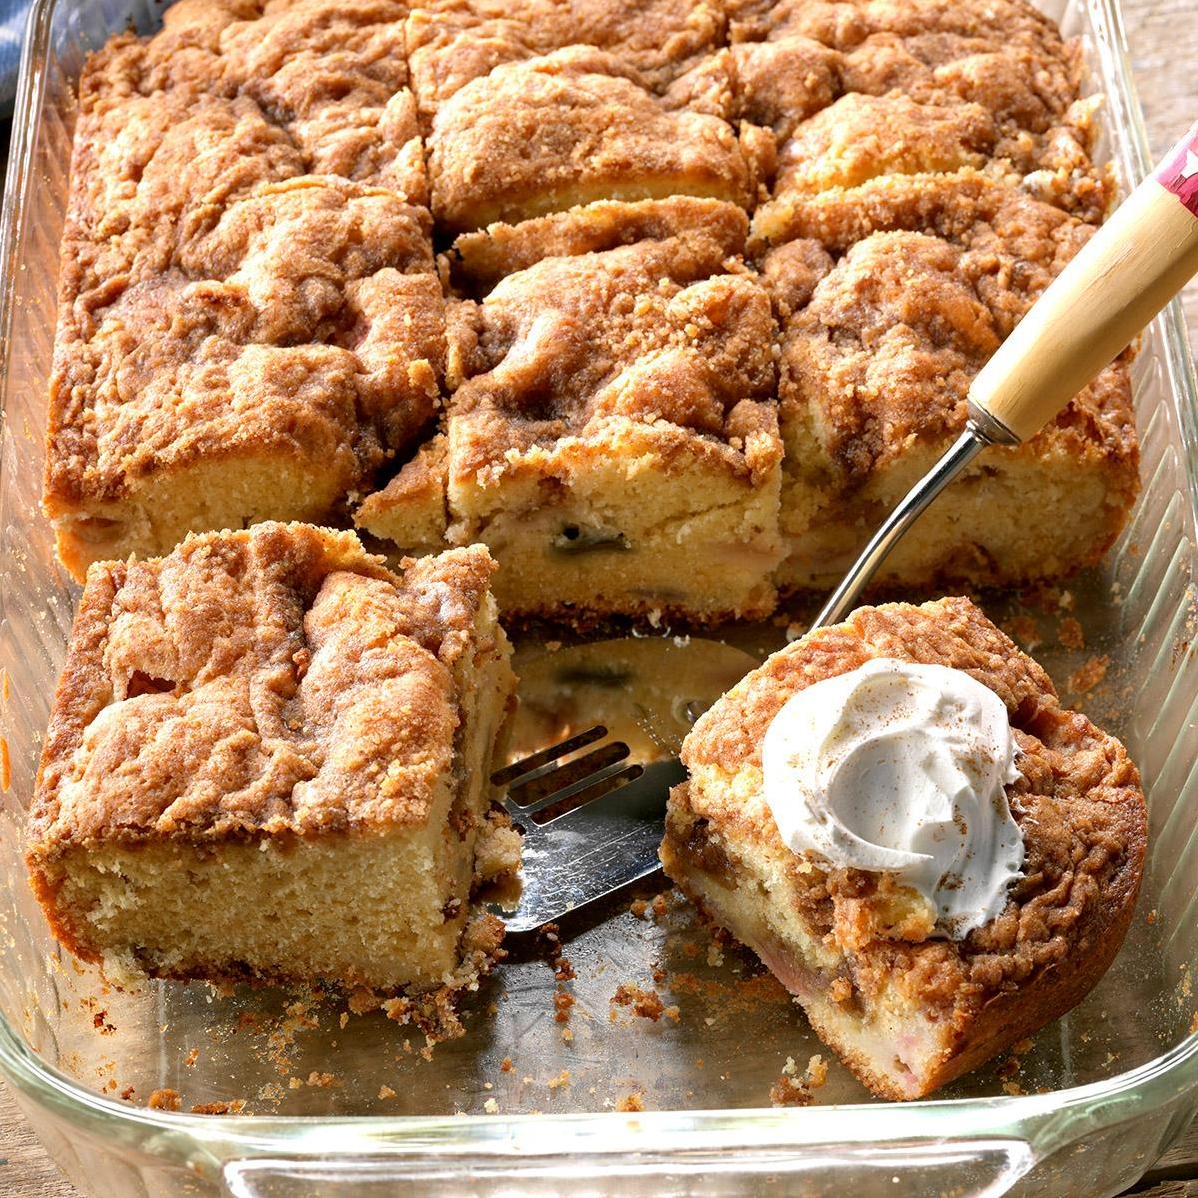  This coffee cake is a slice of pure comfort!